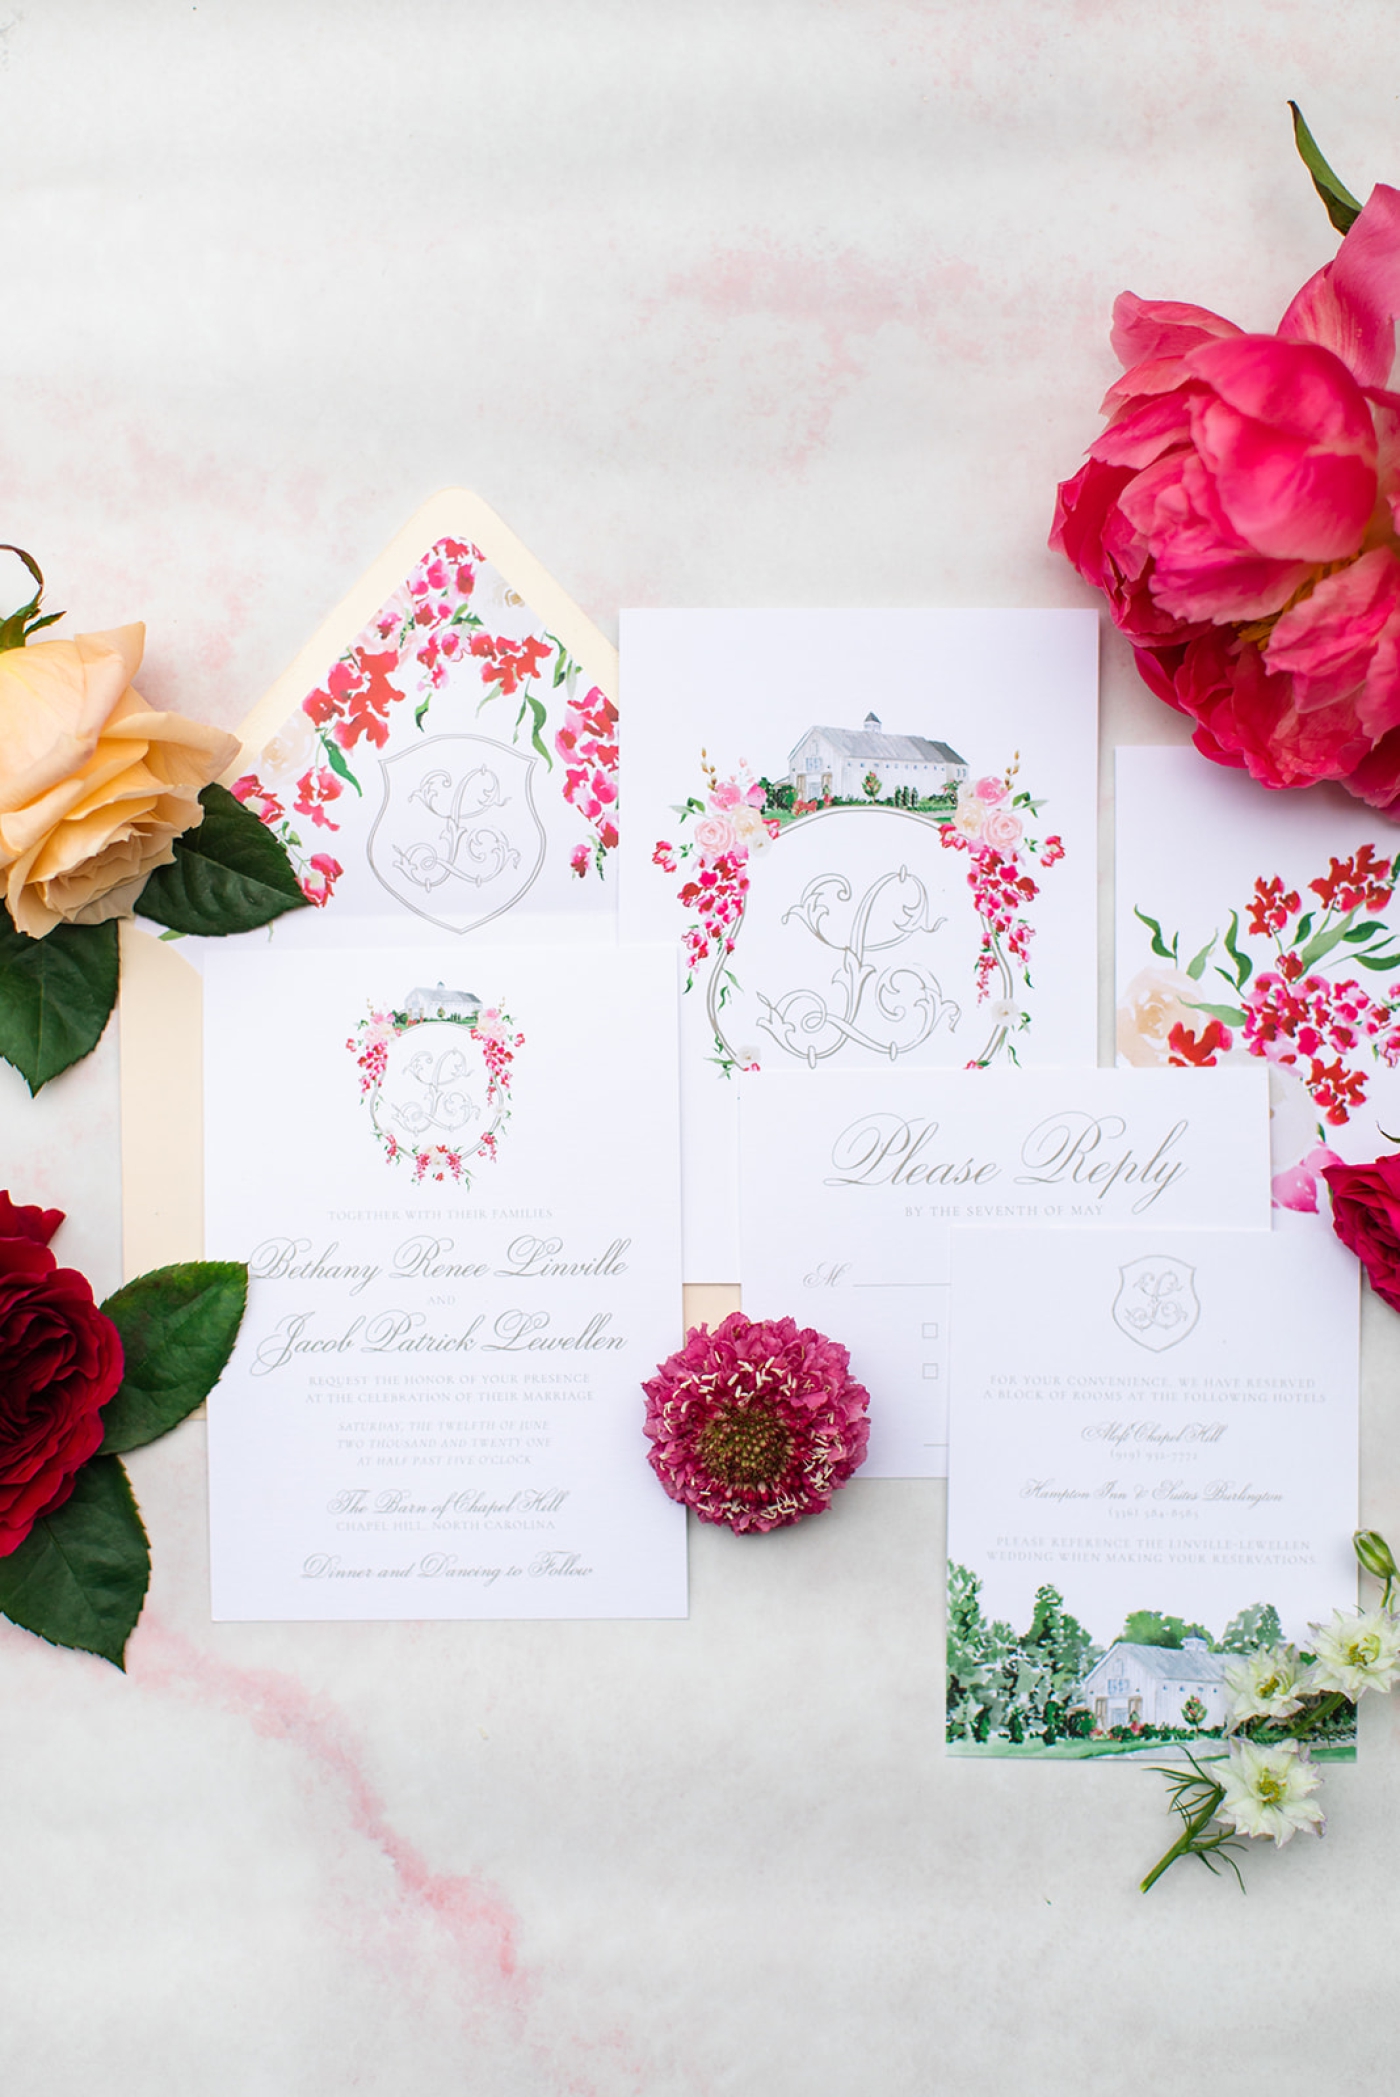 When to send your wedding invitations and stationery